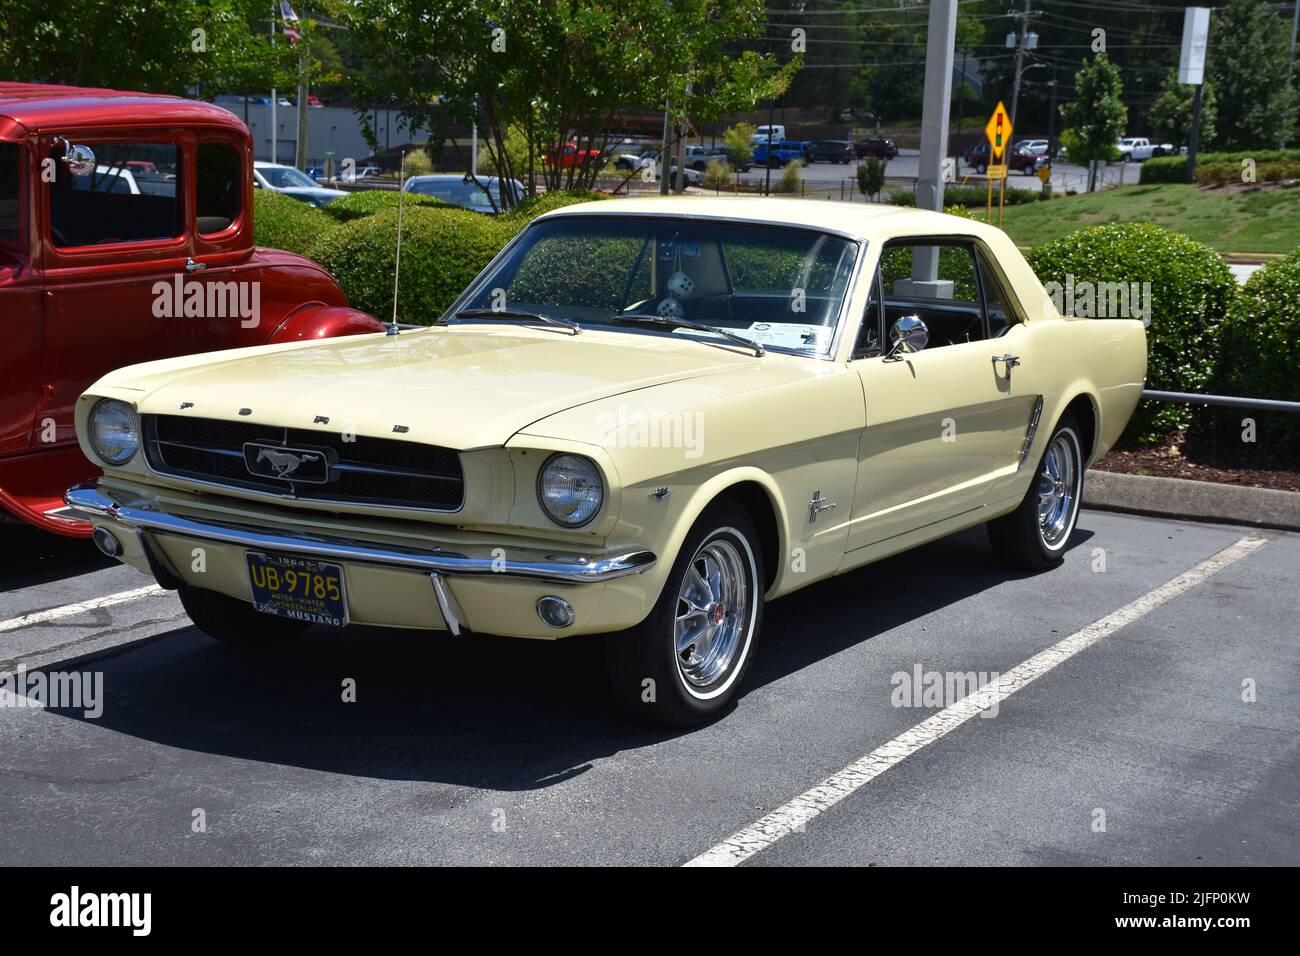 A 1964-1/2 Ford Mustang with a 289 V8 Engine on display at a car show. Stock Photo